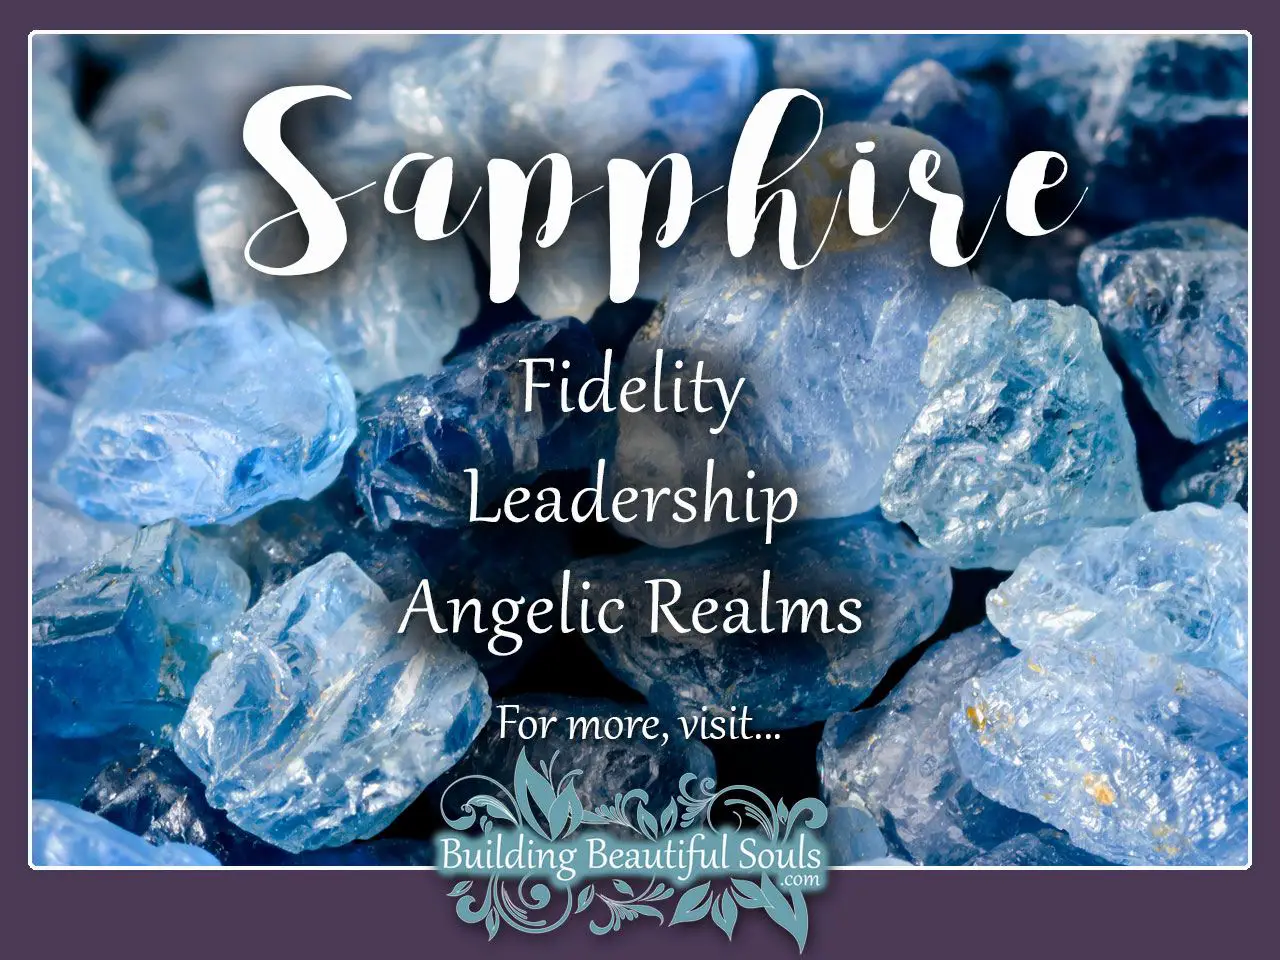 Dreams Meaning Of Sapphire